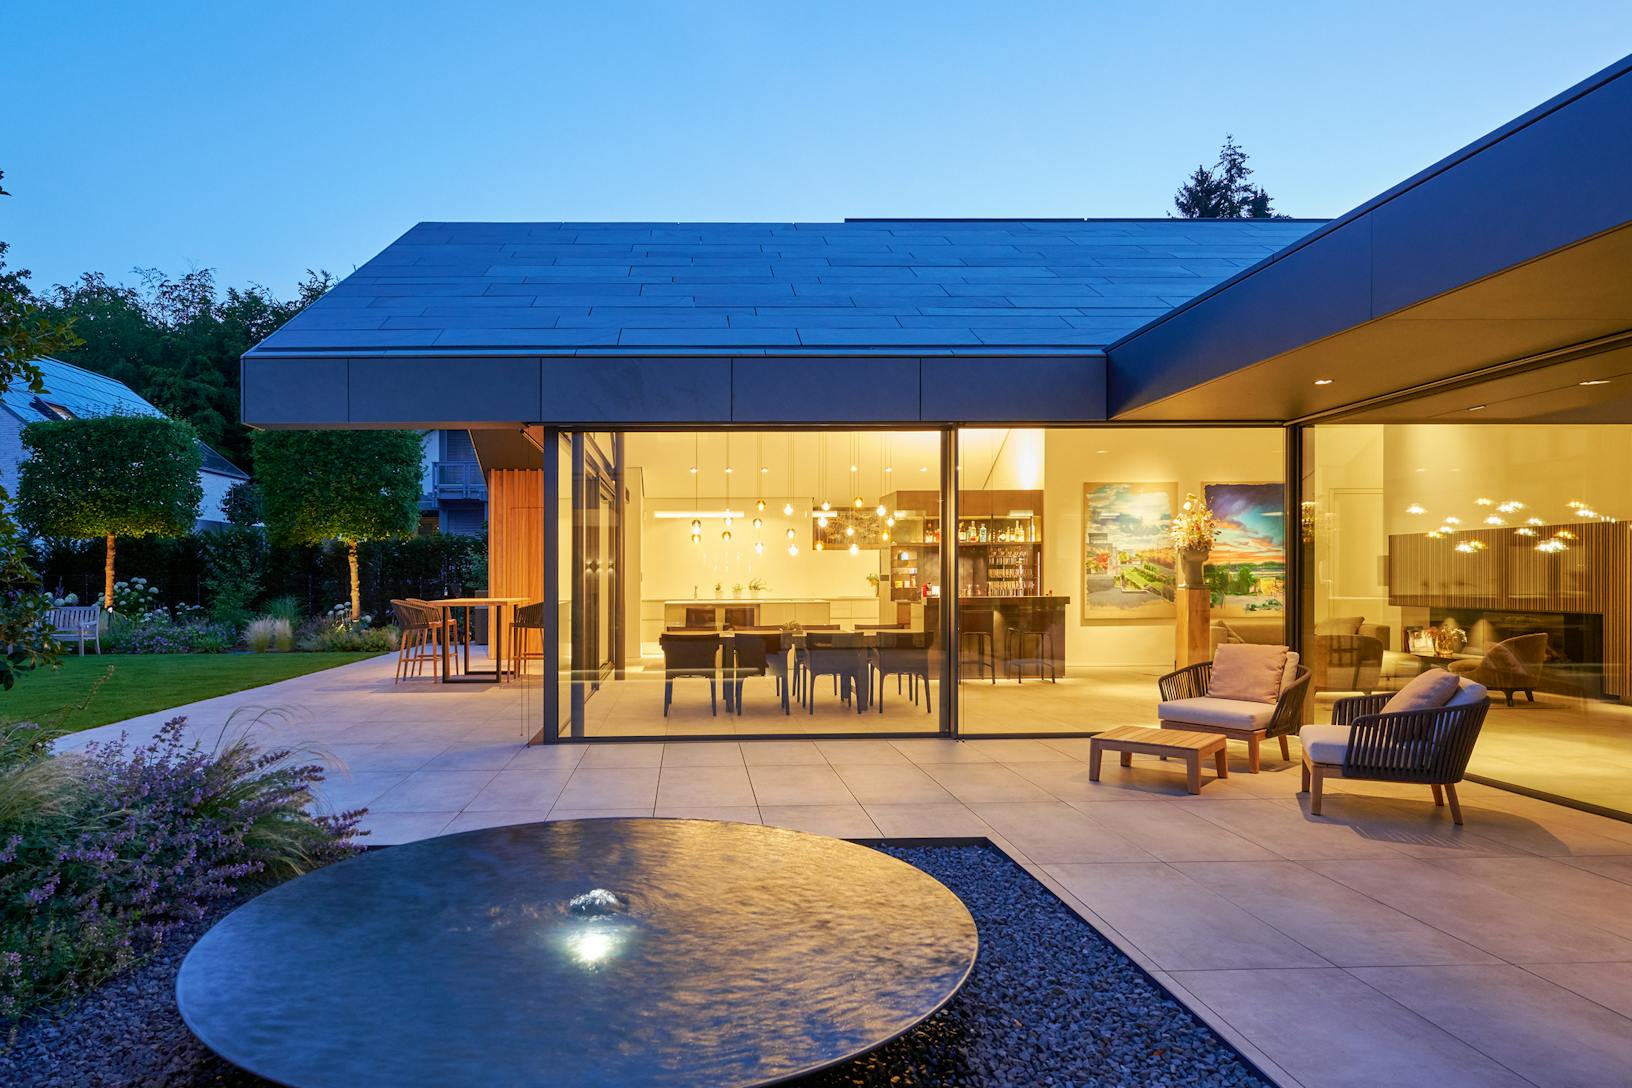  A modern house with a water feature - sliding doors